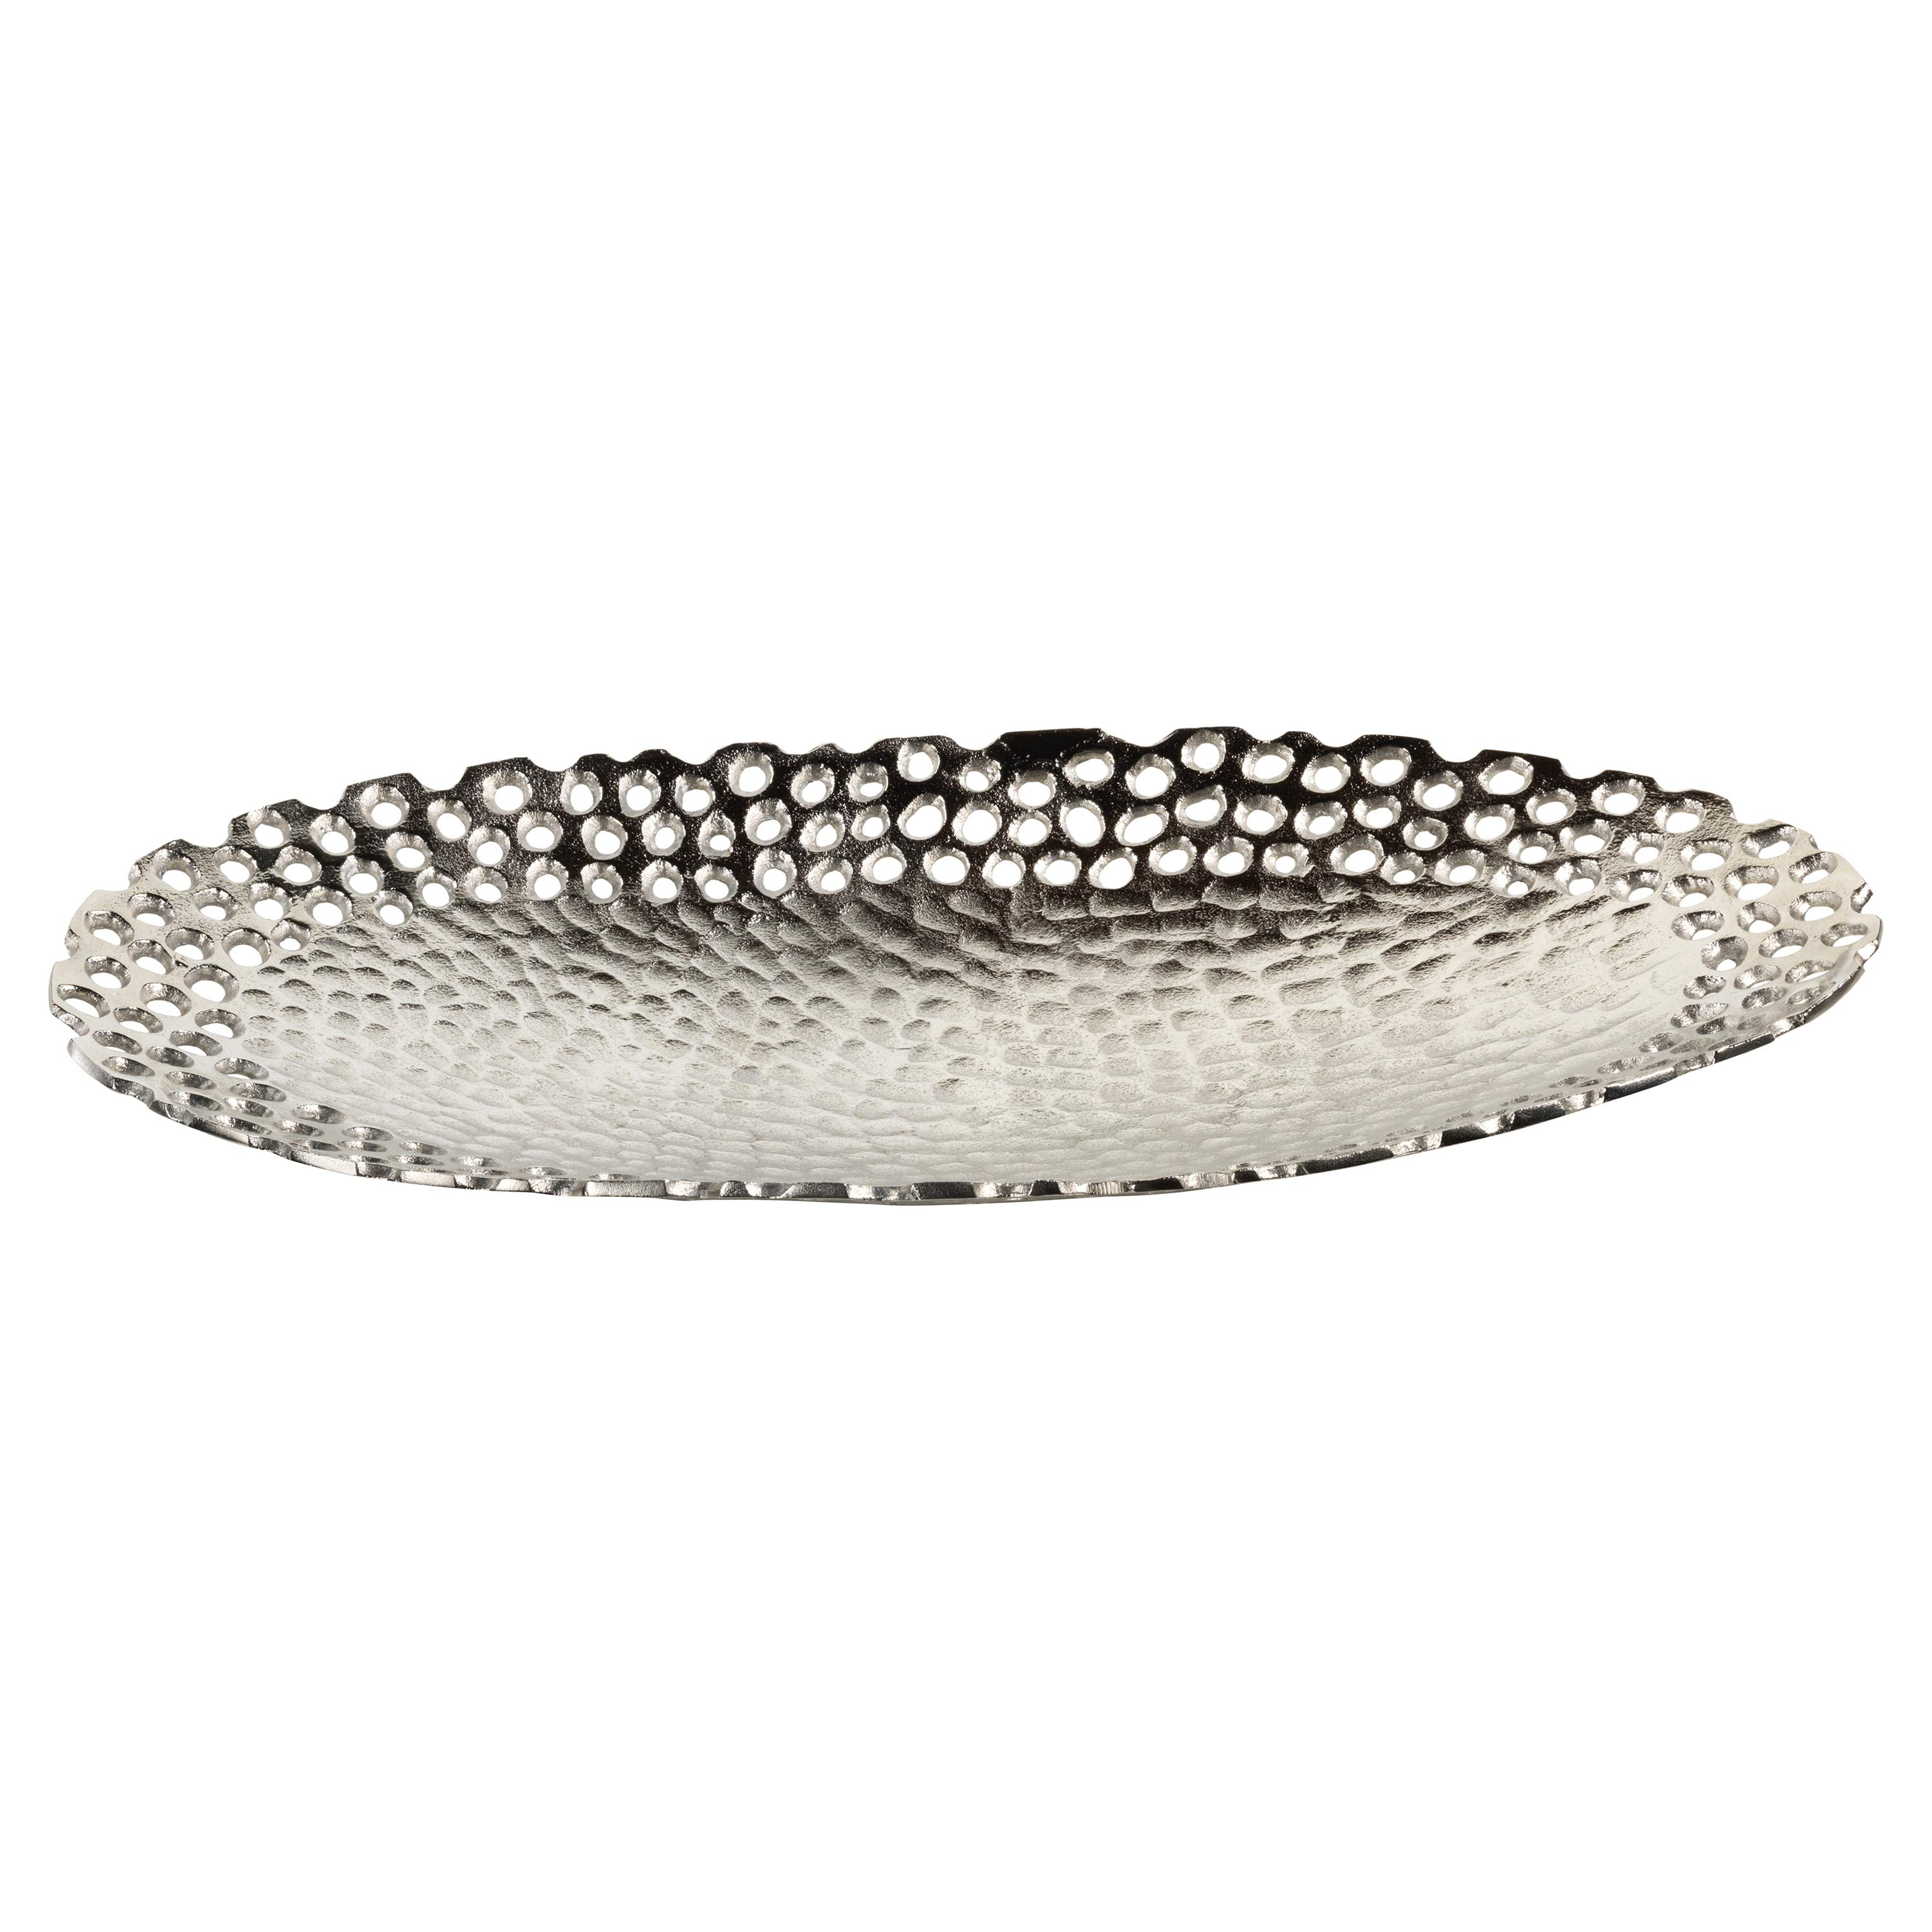 Roman Industrial Loft Hammered & Cut Out Grand Oval Decorative Silver Bowl, 26" - Kathy Kuo Home